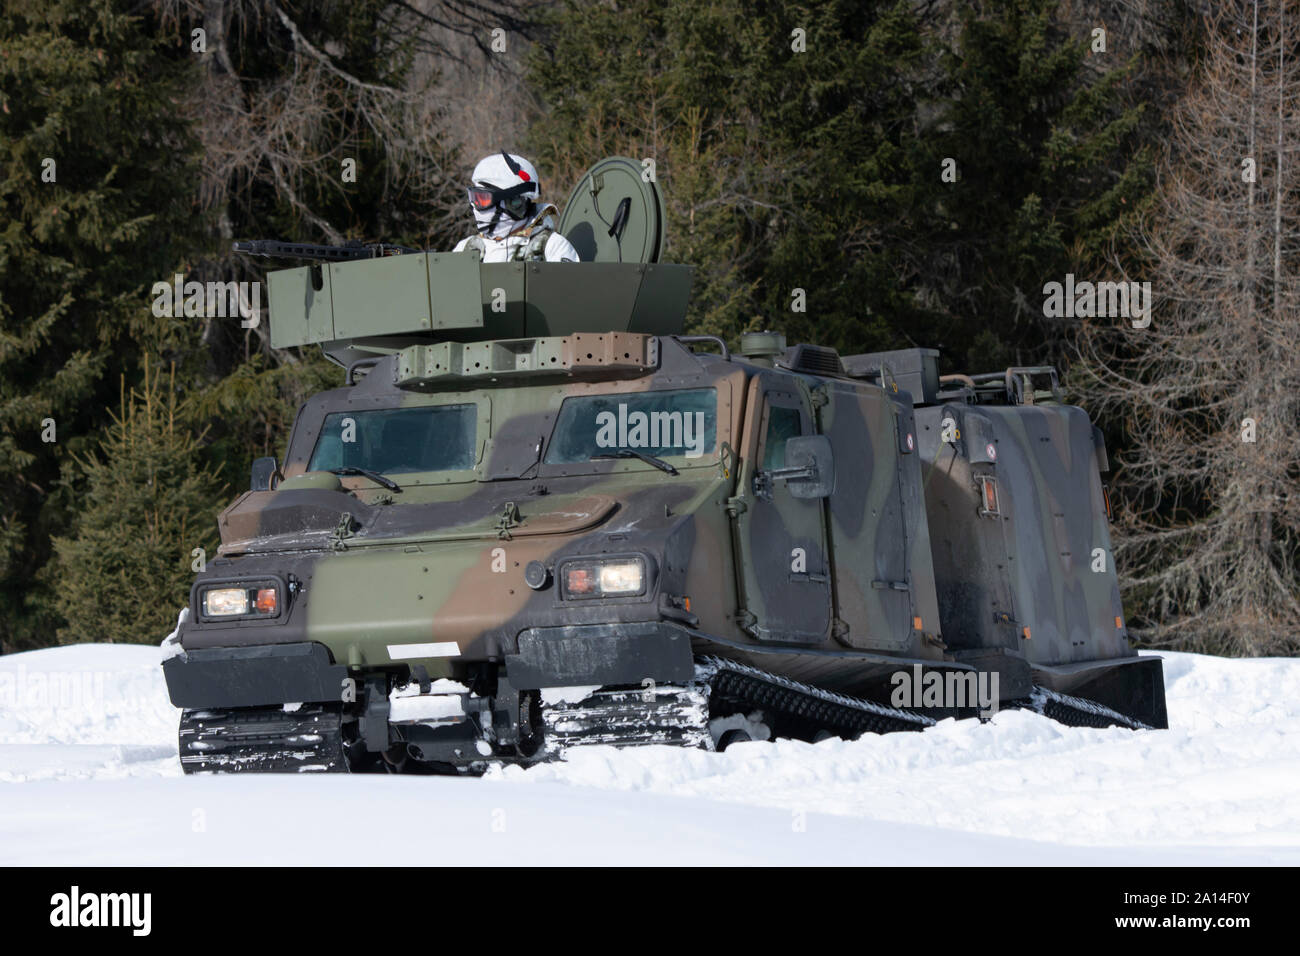 Italian Army Bv 206S armored personnel carrier. Stock Photo